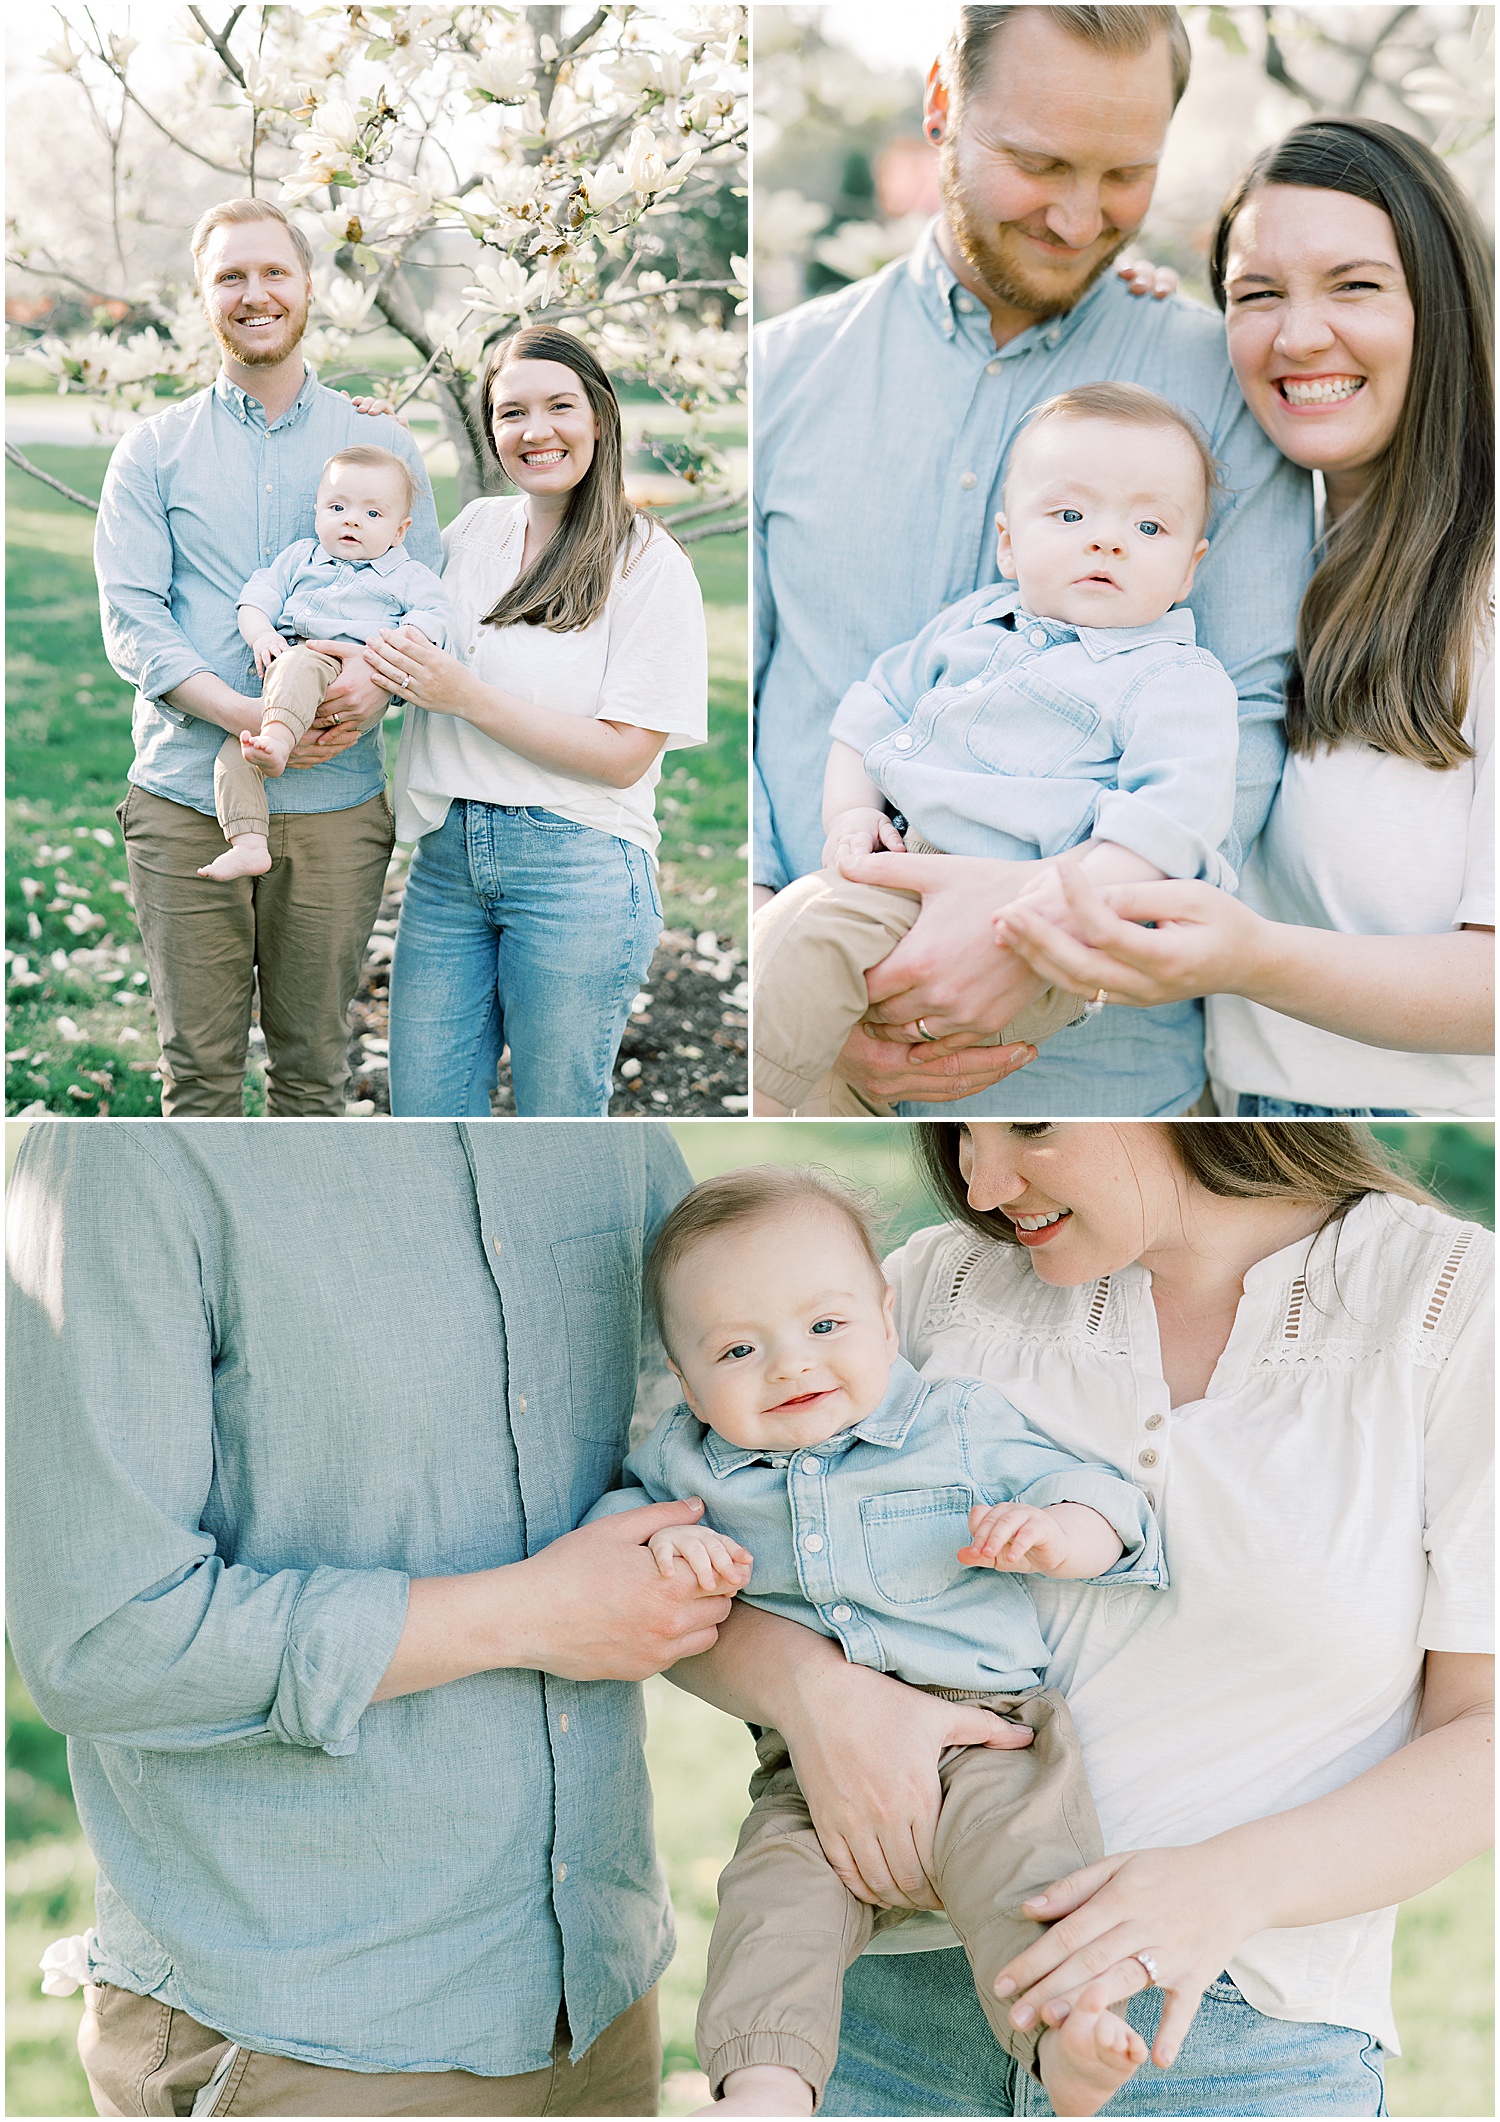 Carlisle Spring Family Session with family of three under blooming floral tree 